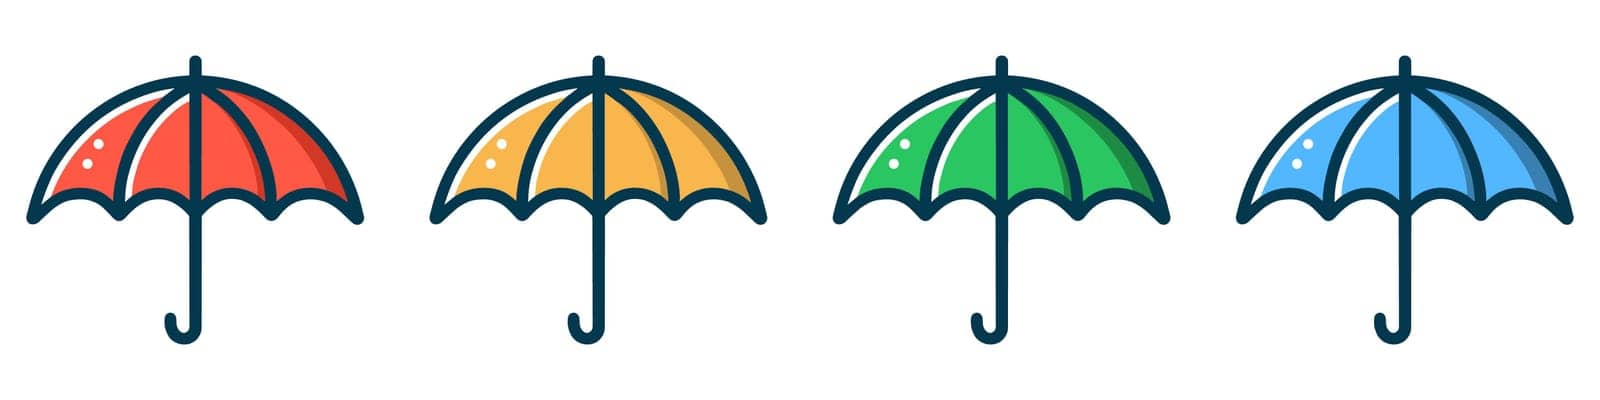 Umbrella icon isolated on white background. Set of colored umbrella icons in flat design. Vector illustration